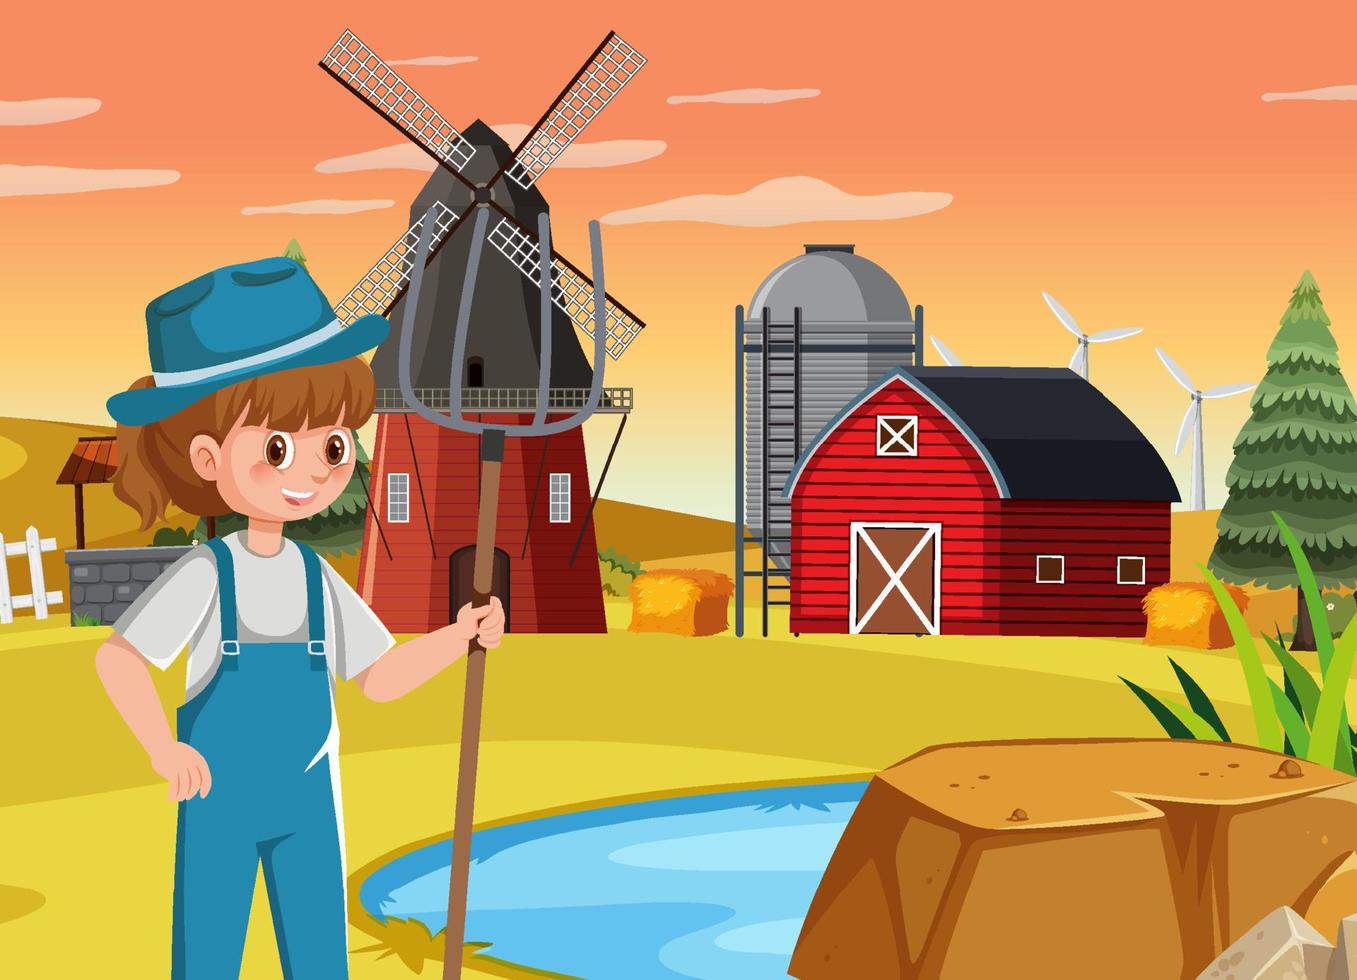 A farmer cartoon character on white background vector